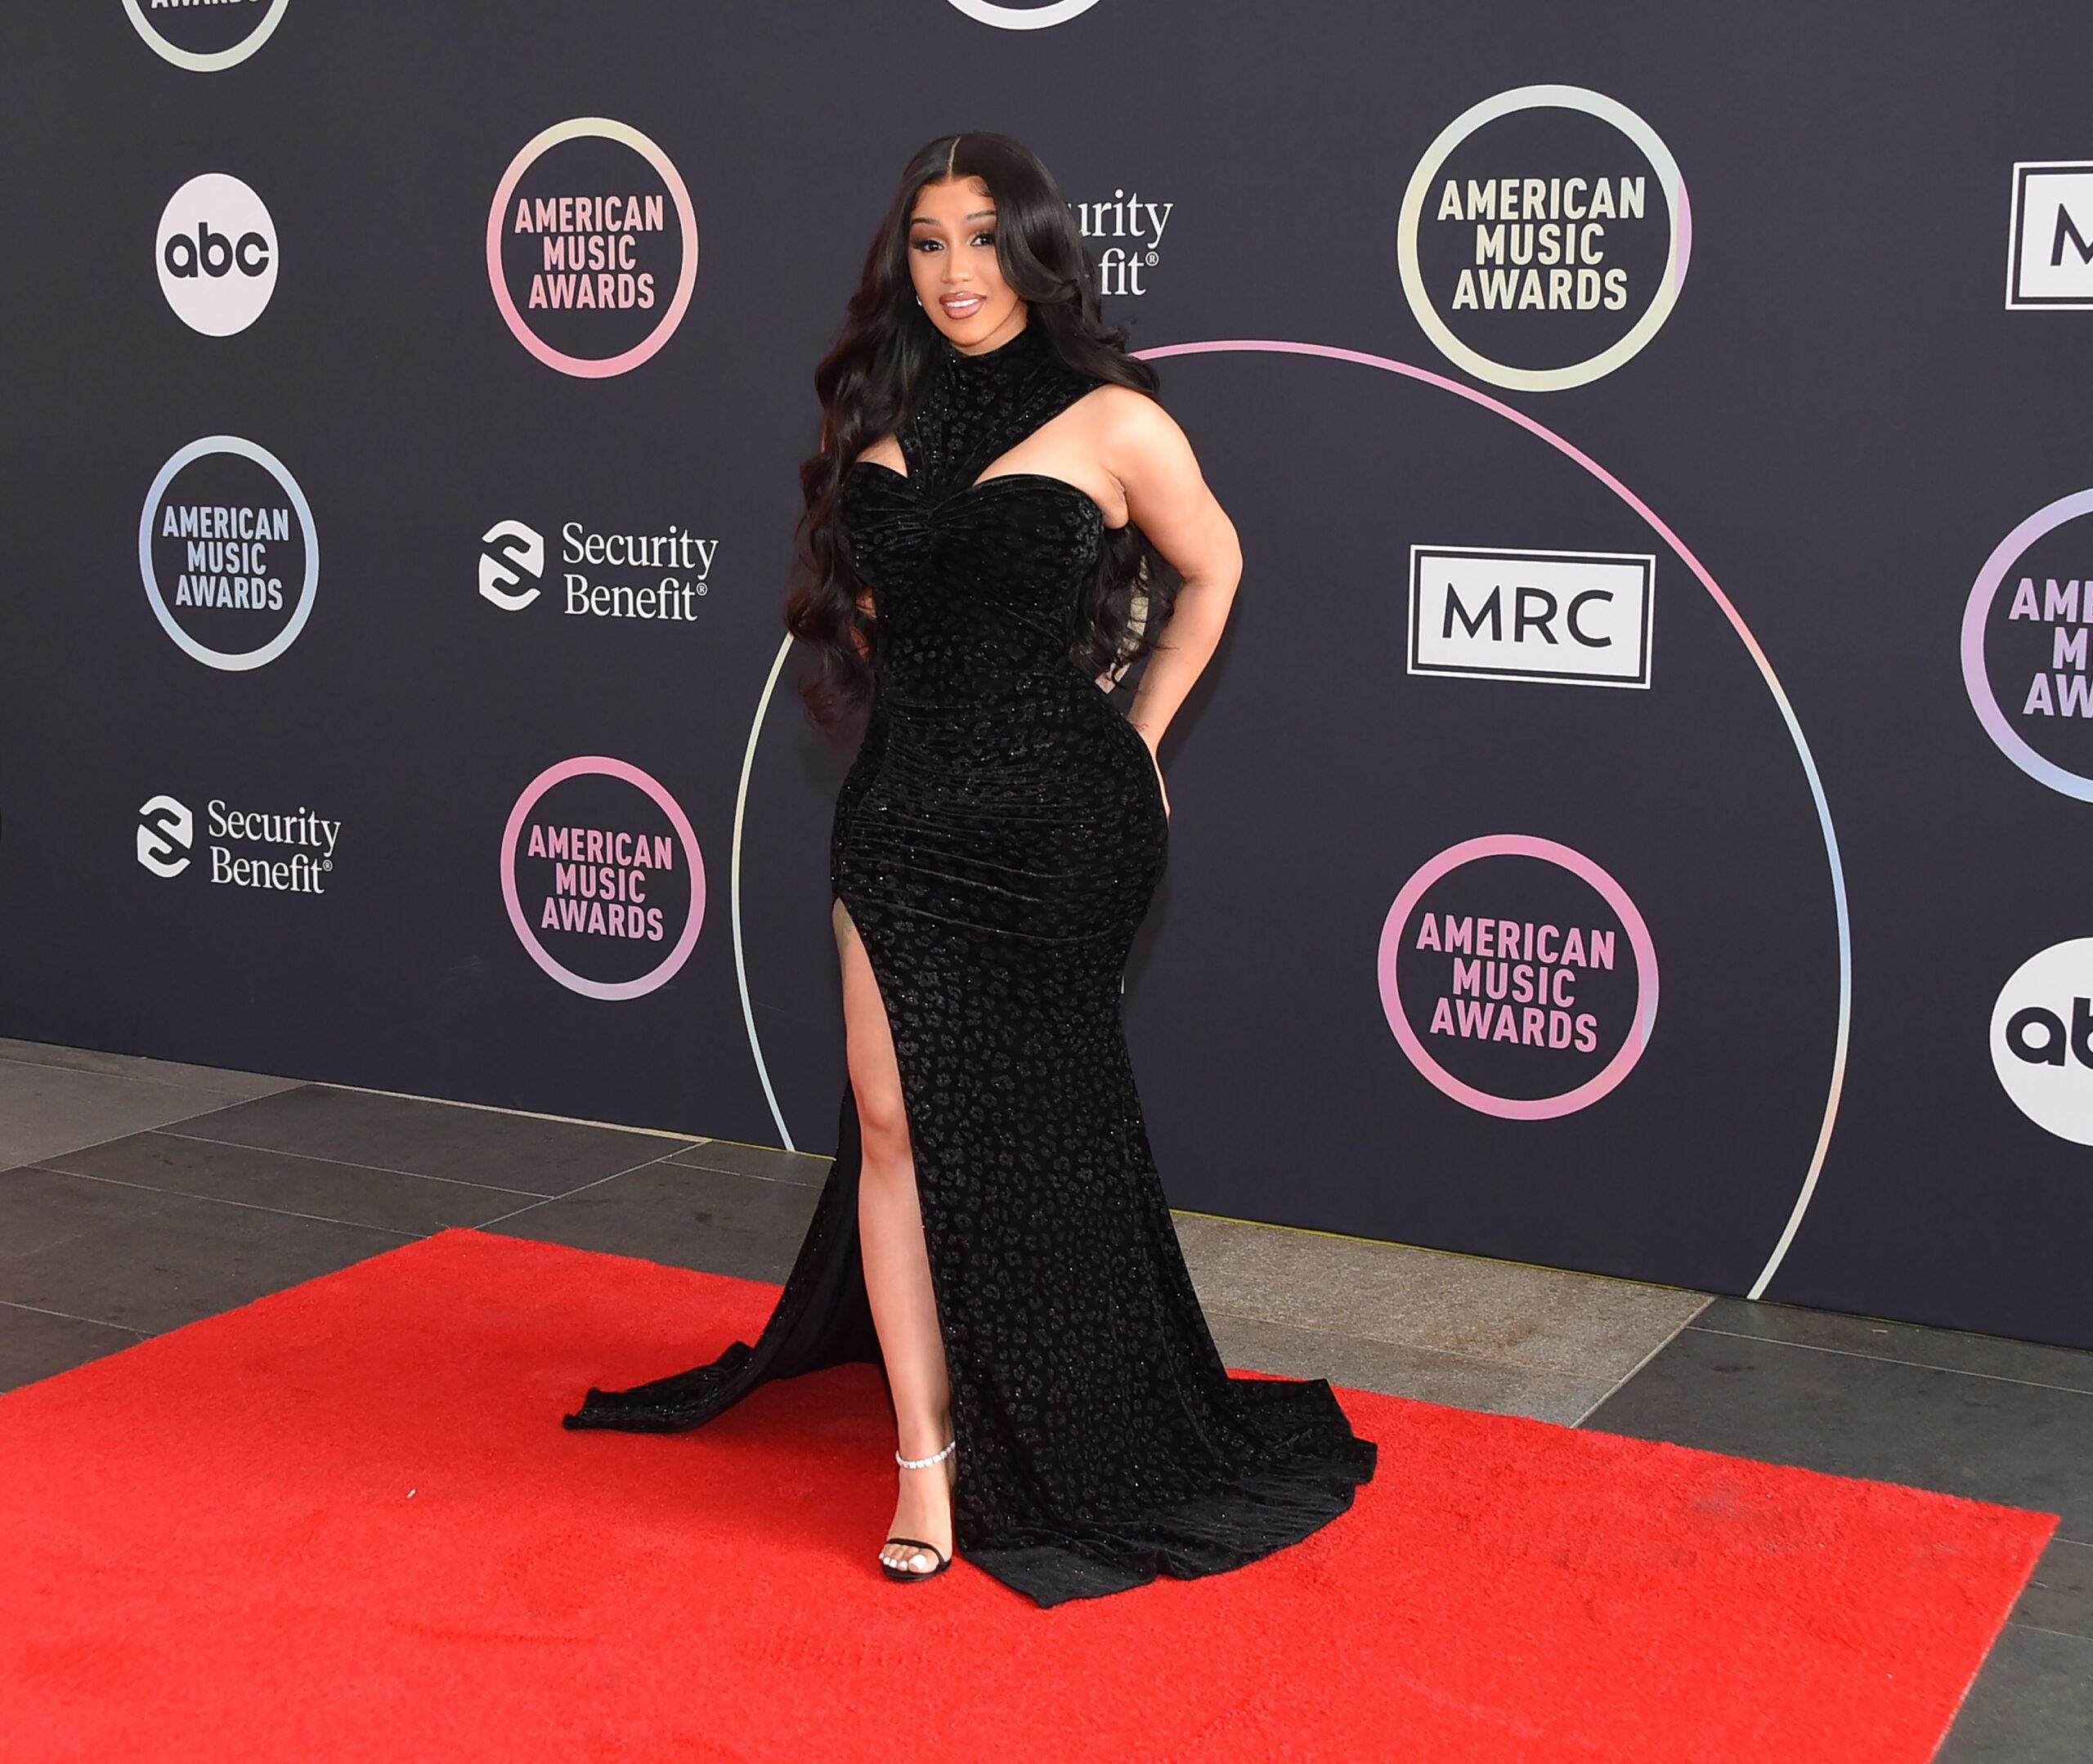 2021 American Music Awards Red Carpet Roll-Out with Cardi B